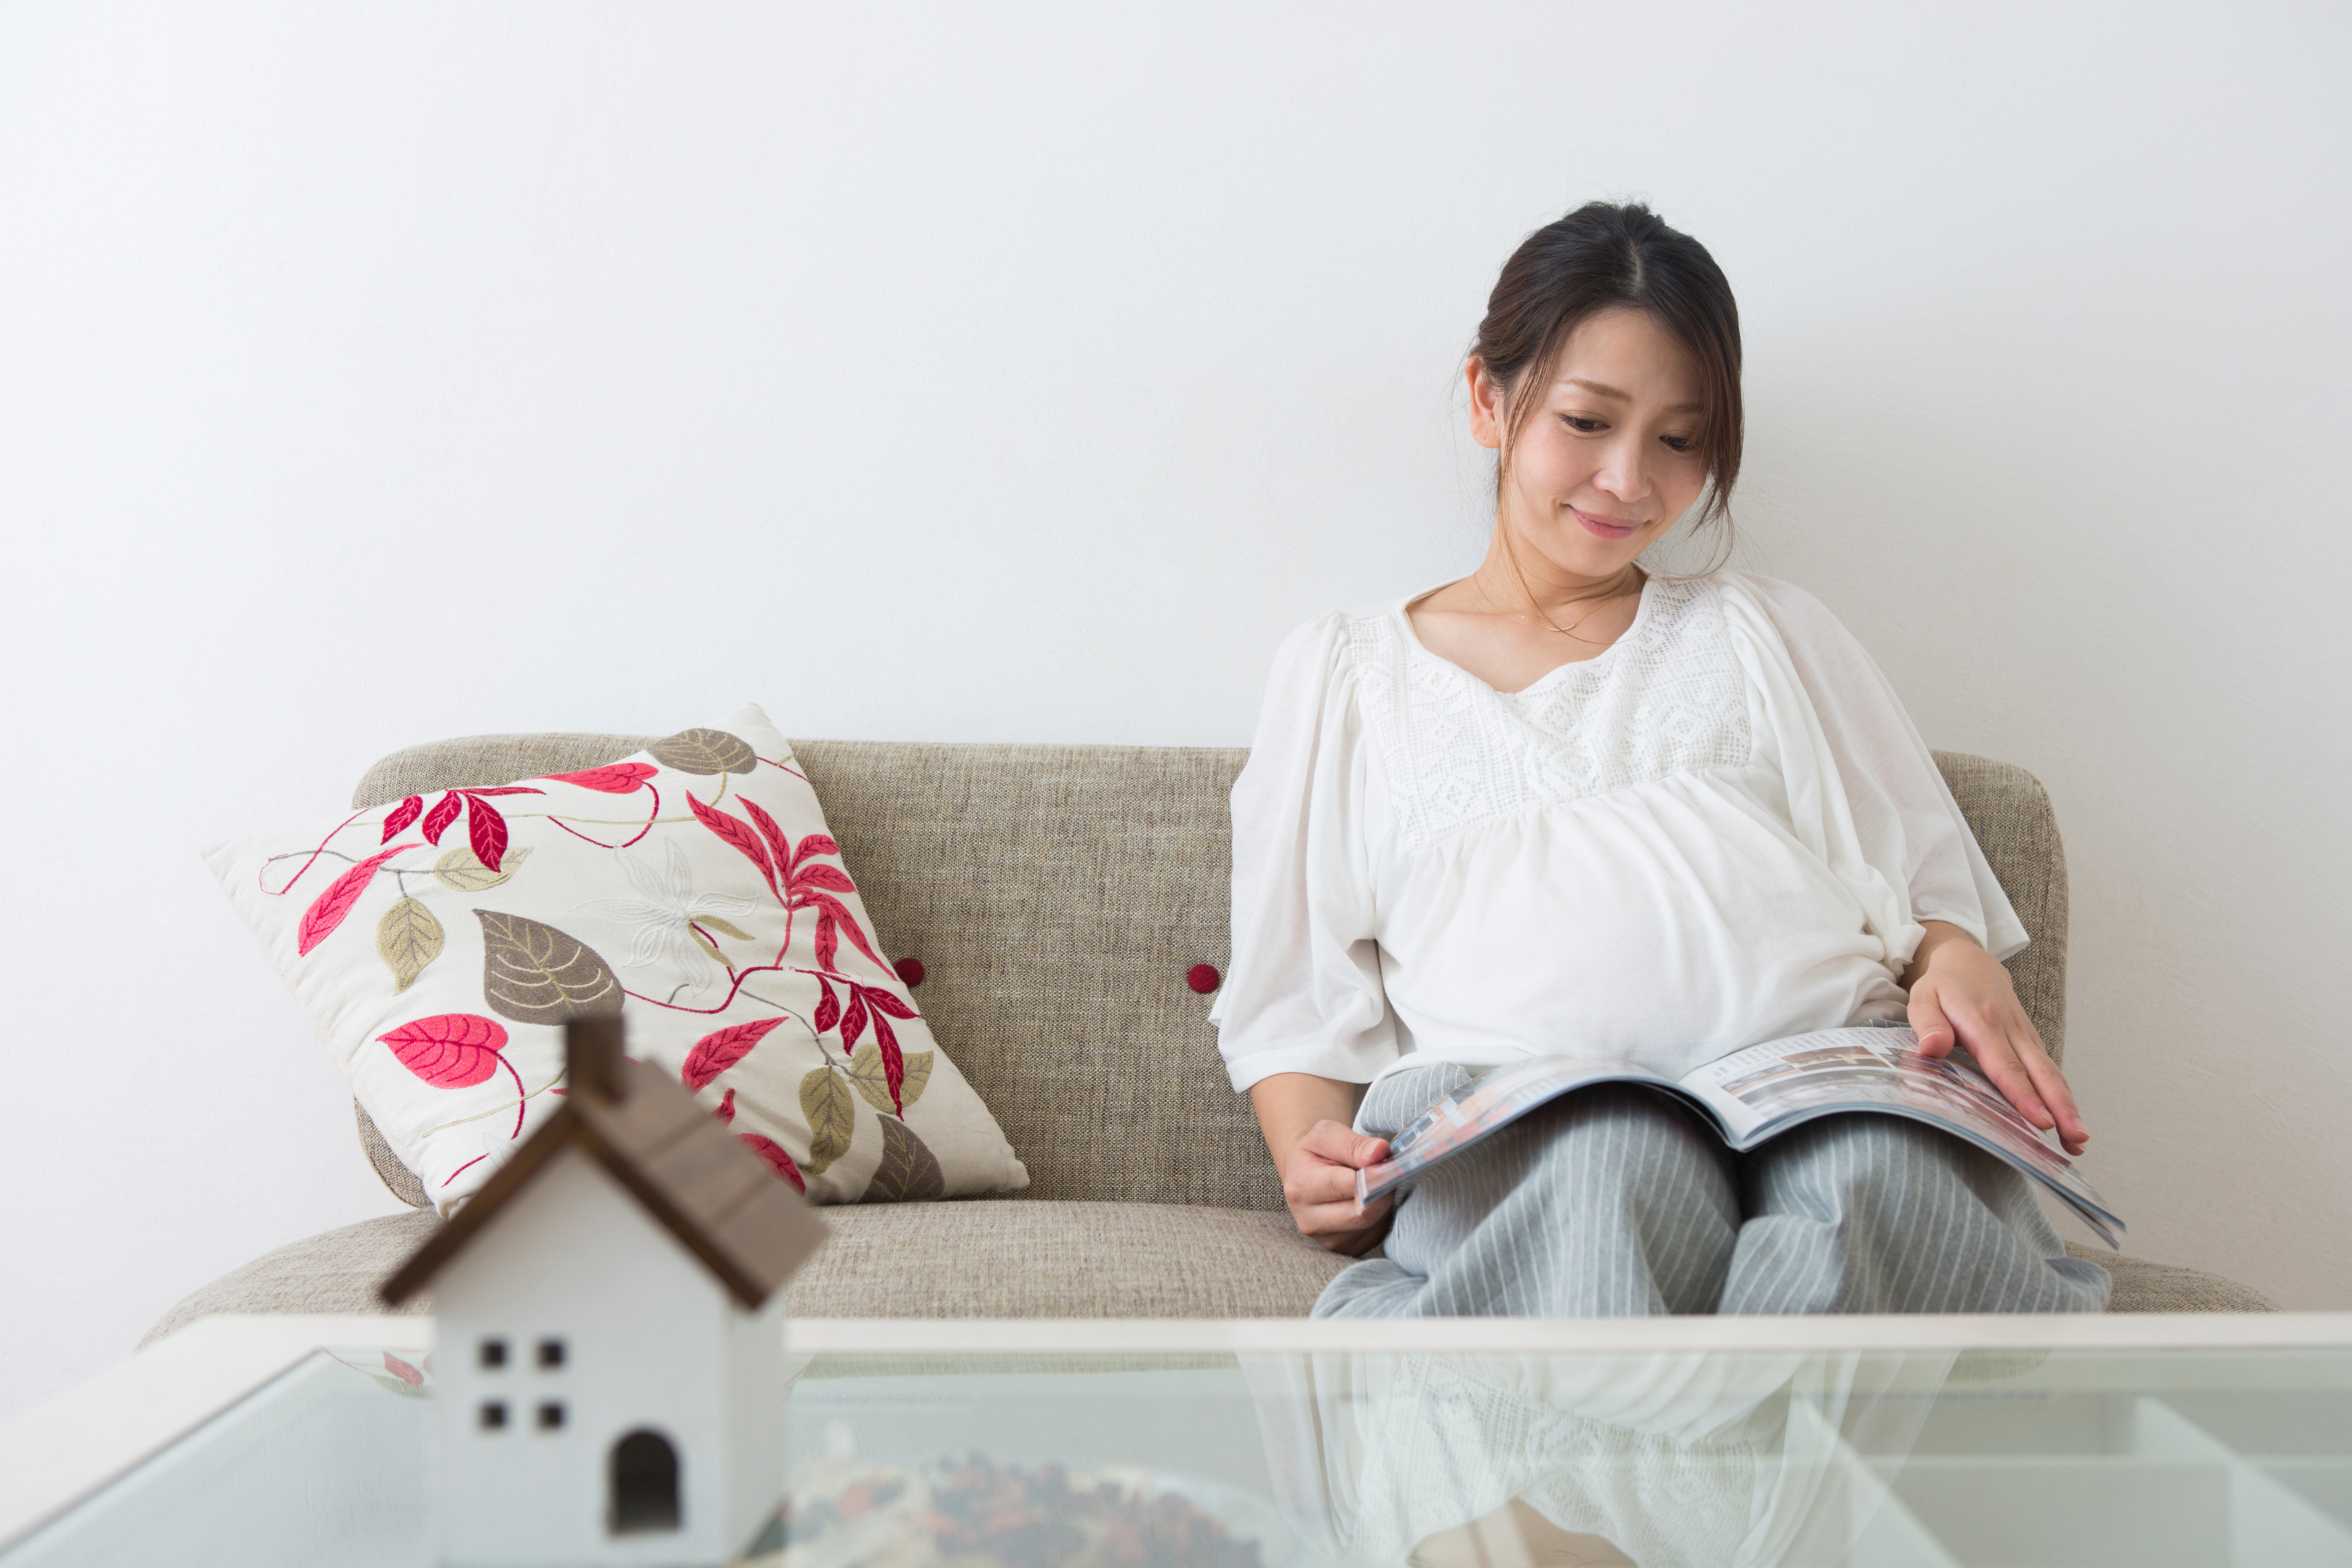 5 weeks pregnant woman sitting on a couch reading a book